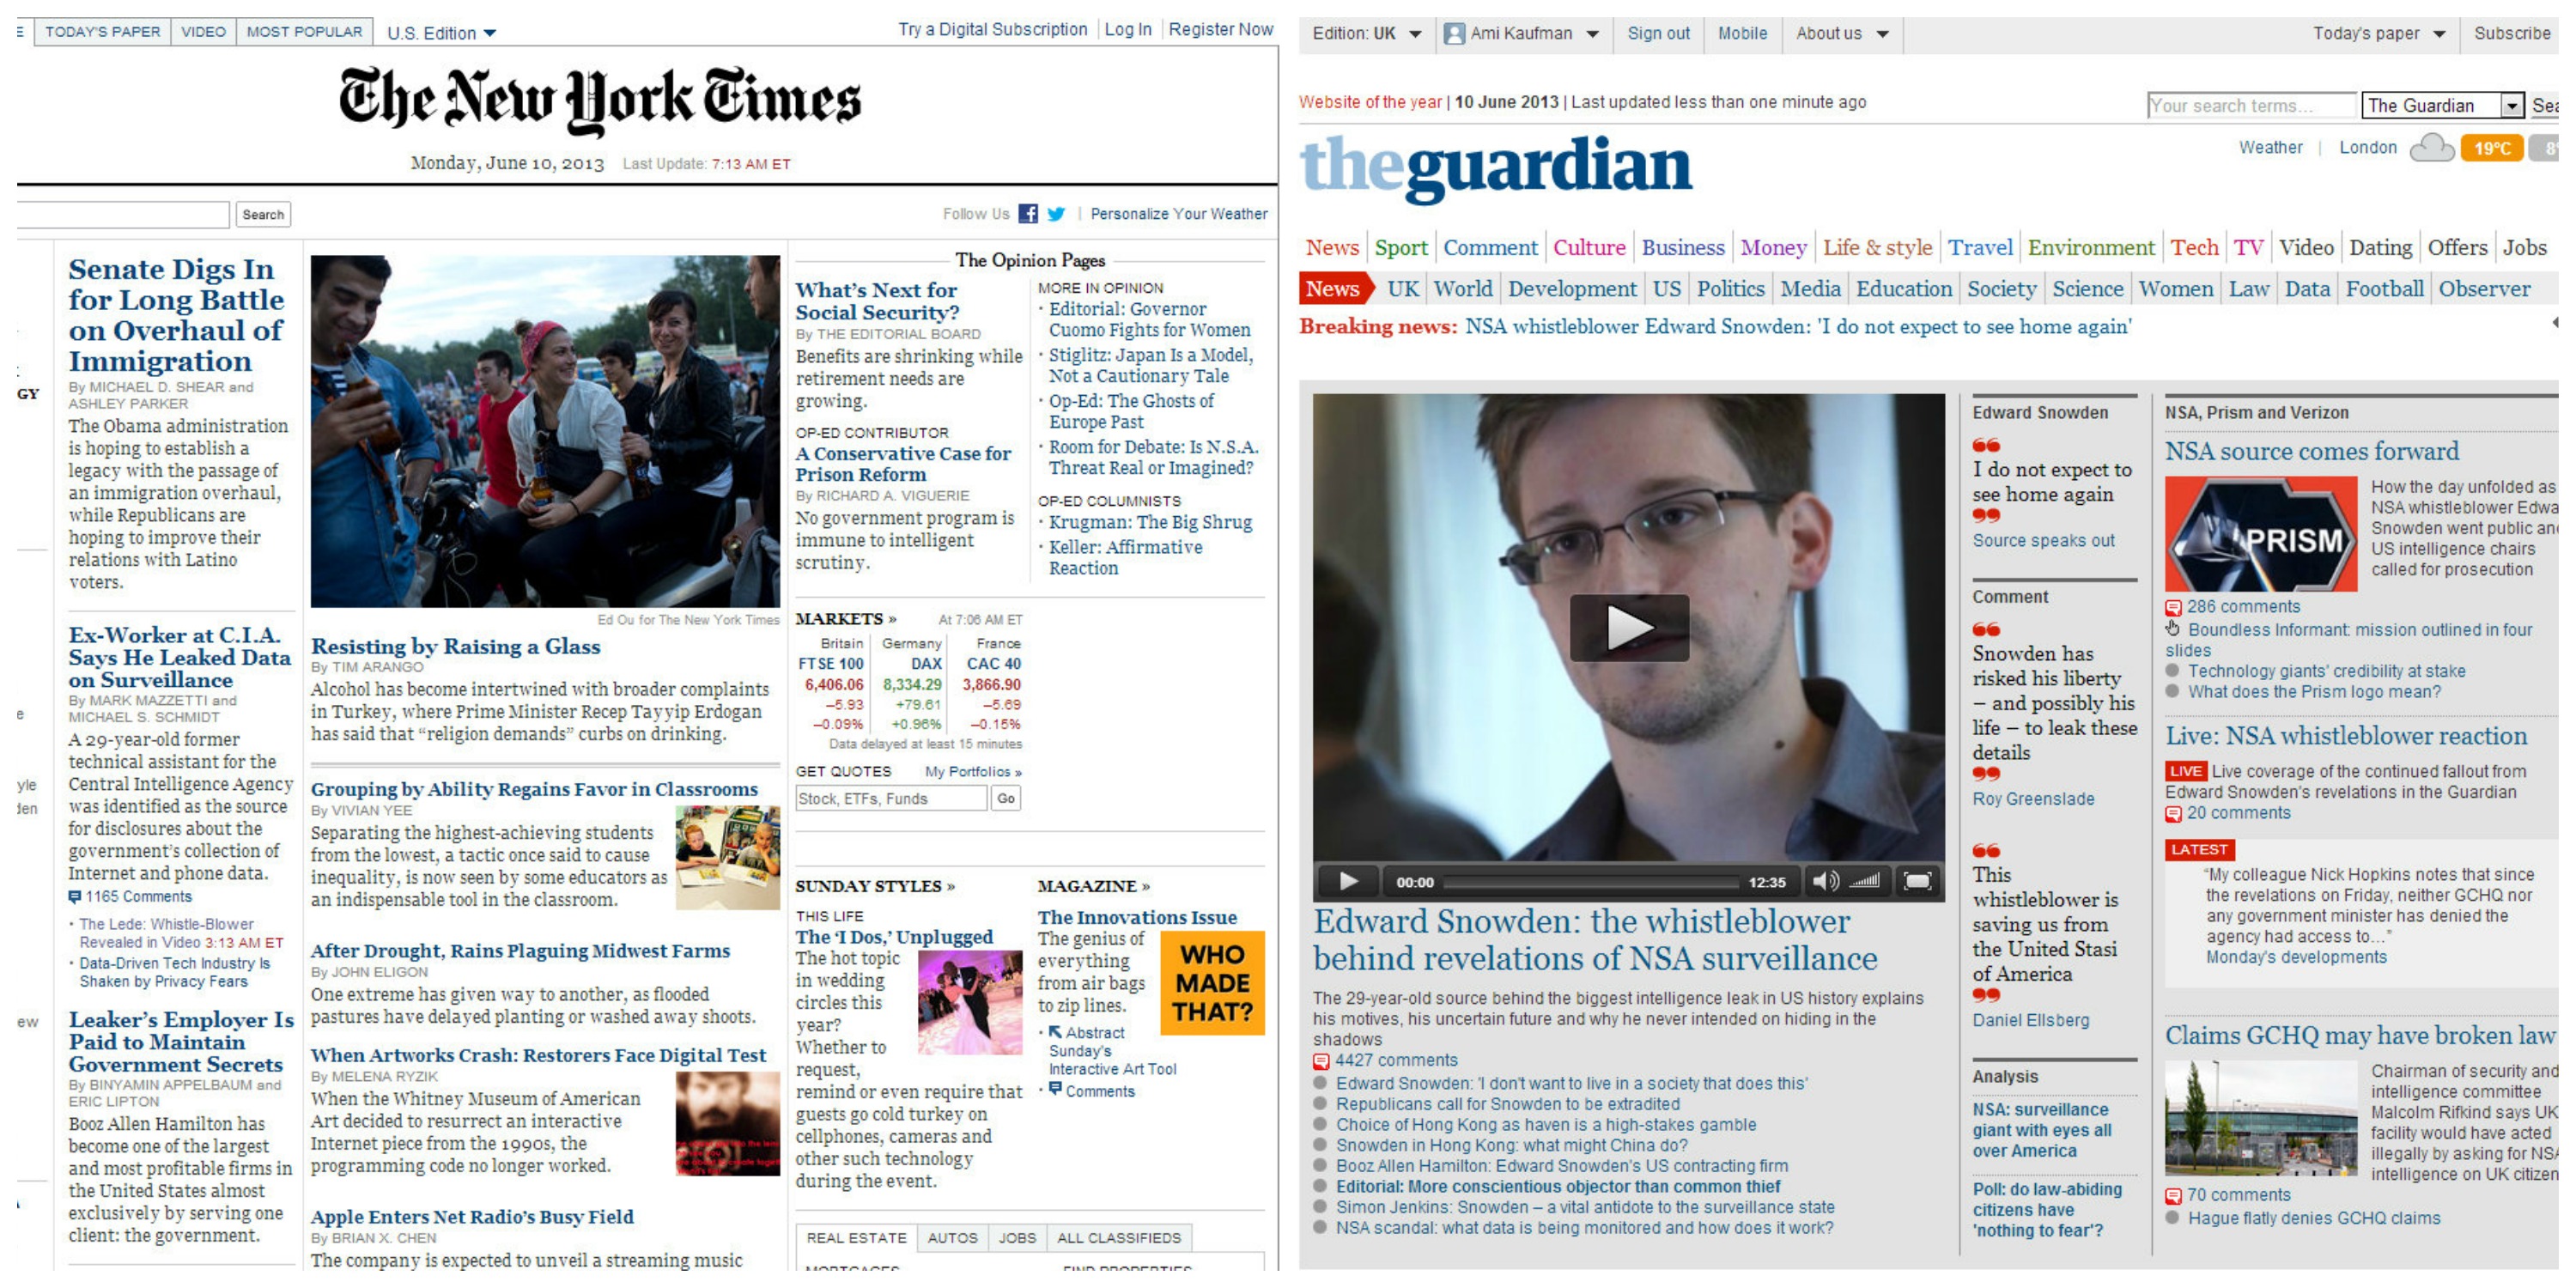 Did Edward Snowden hurt the New York Times’ feelings?